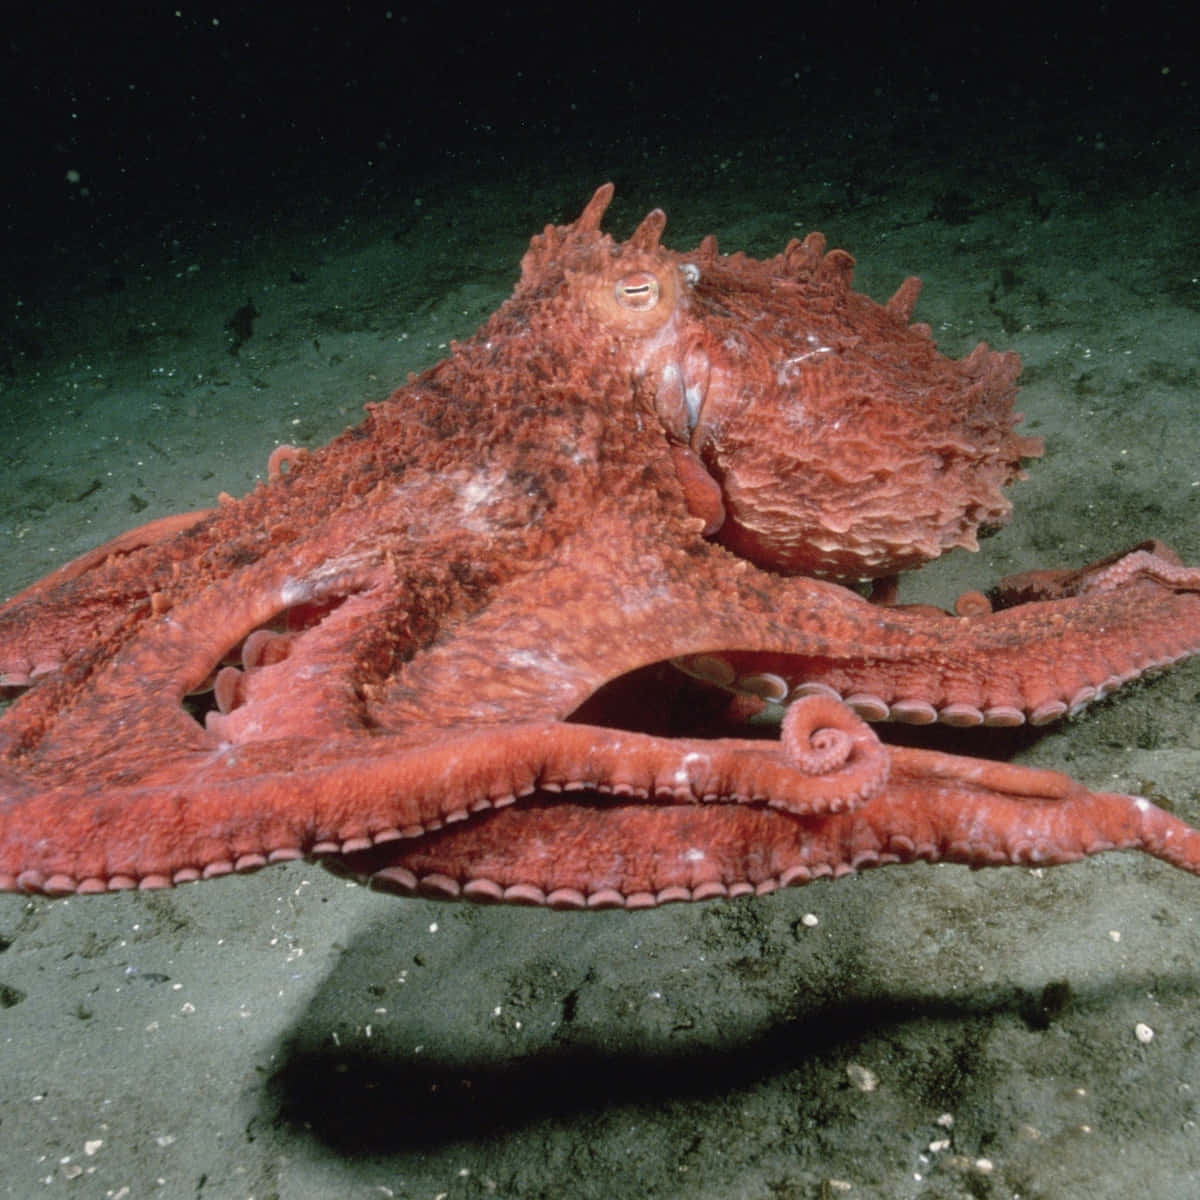 Caption: Behemoth Of The Deep - The Mysterious Giant Pacific Octopus Wallpaper